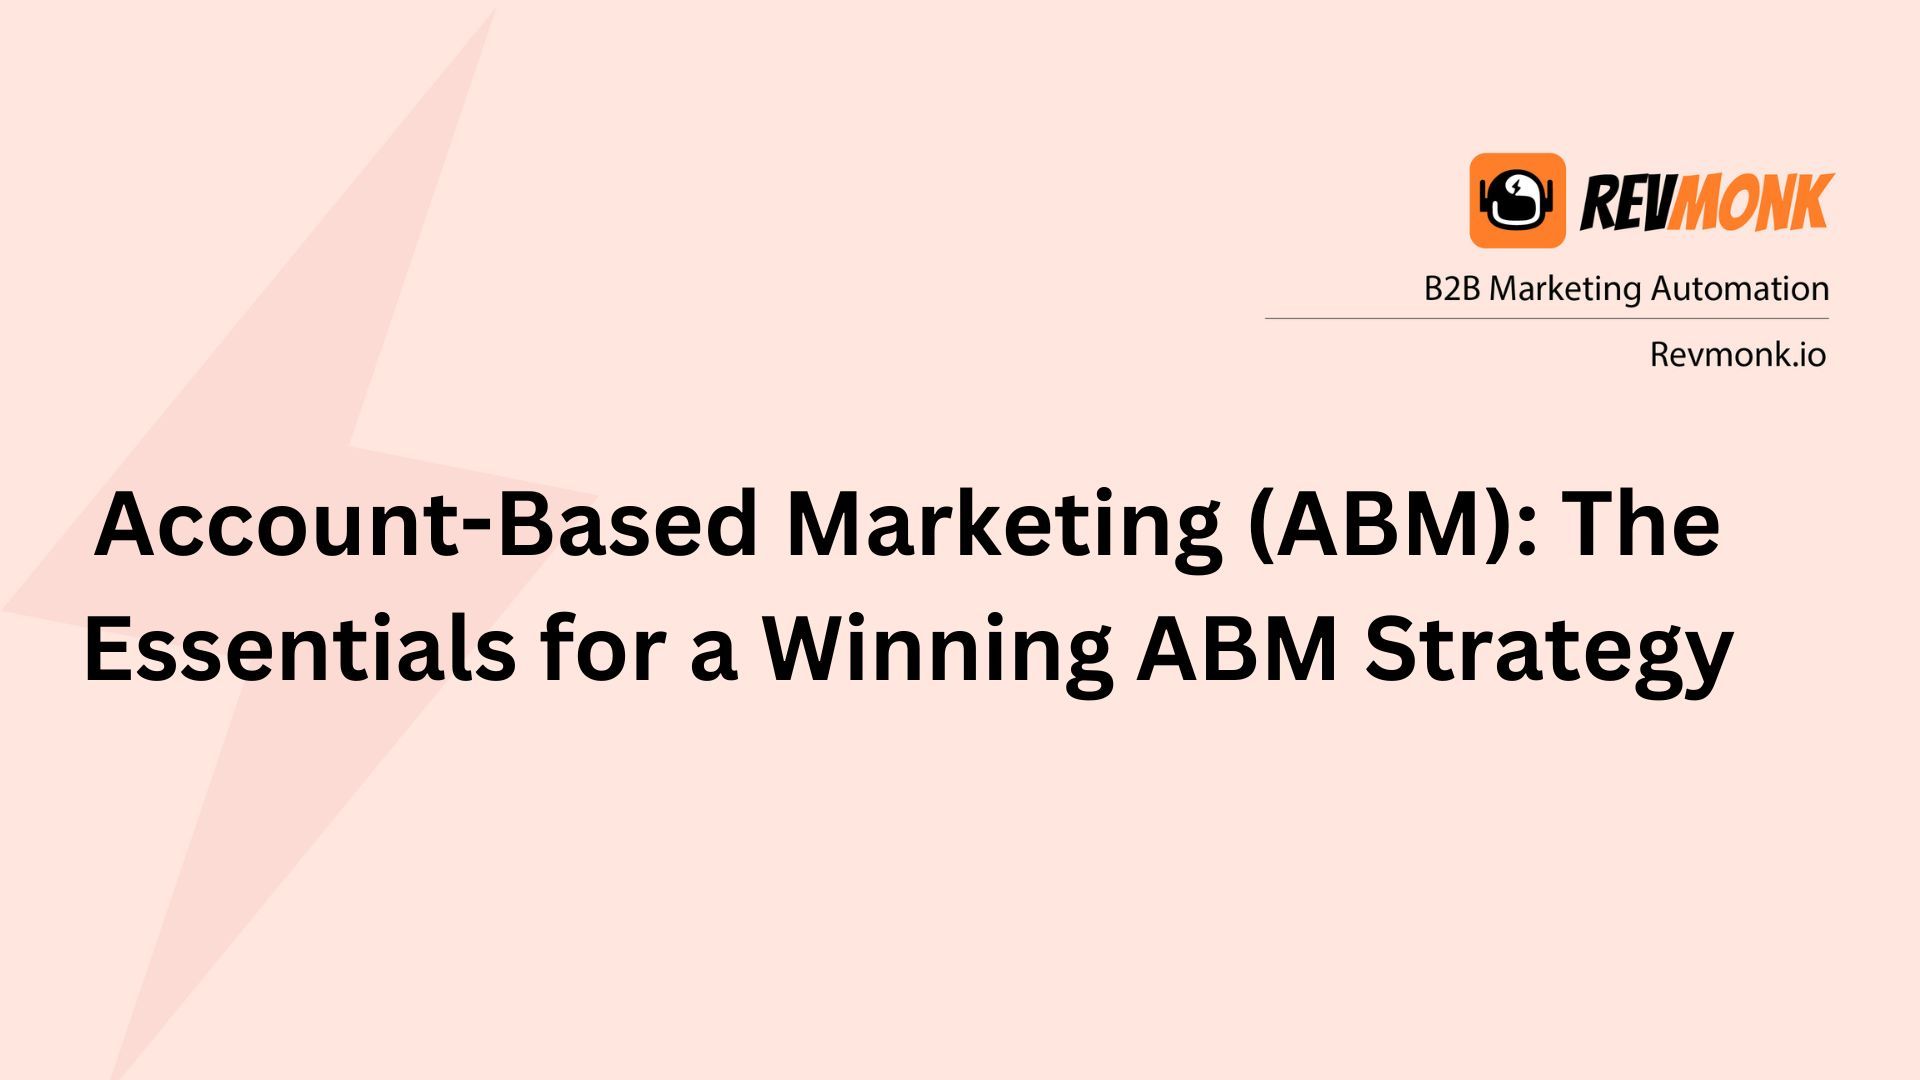 Account-Based Marketing (ABM): The Essentials for a Winning ABM Strategy